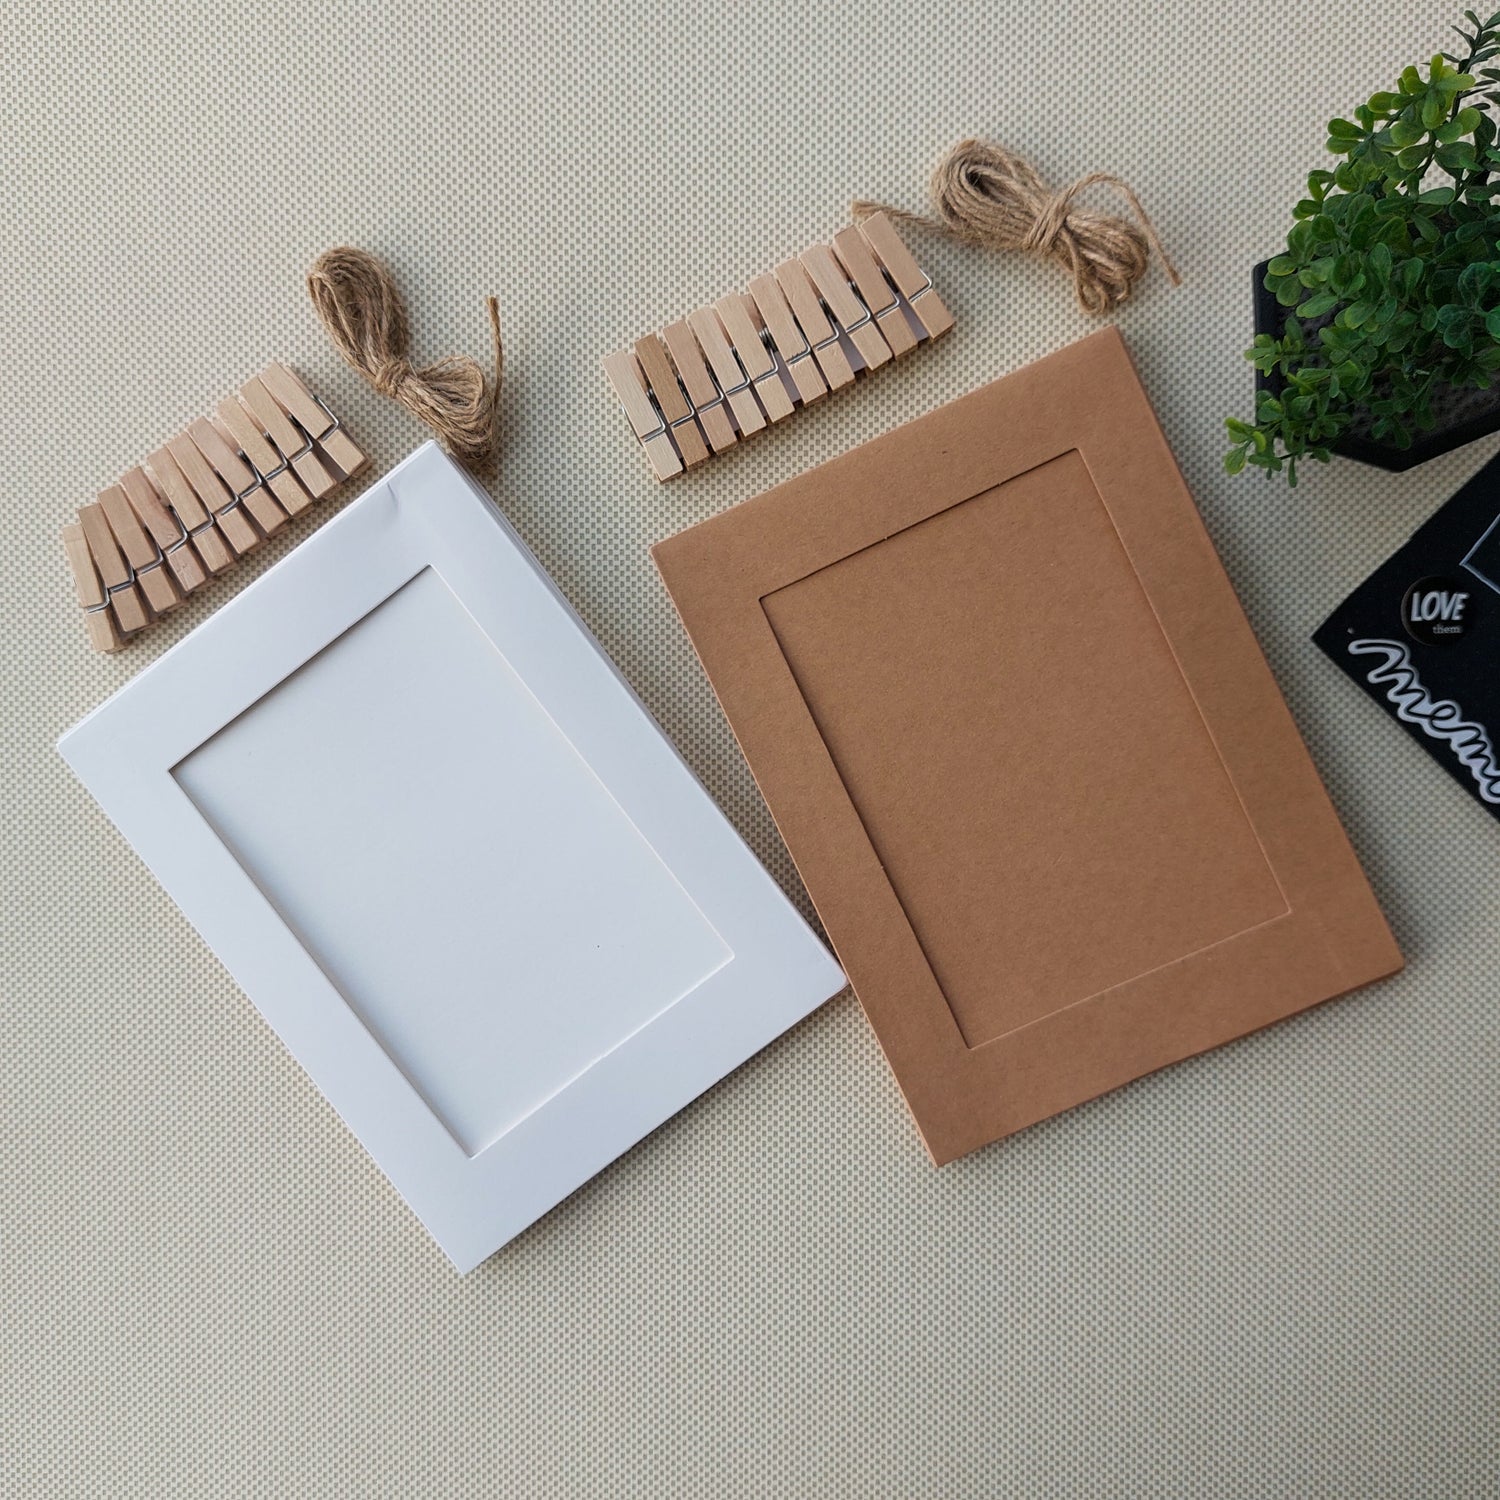 Hanging Photo Frame Kit with String and Clips